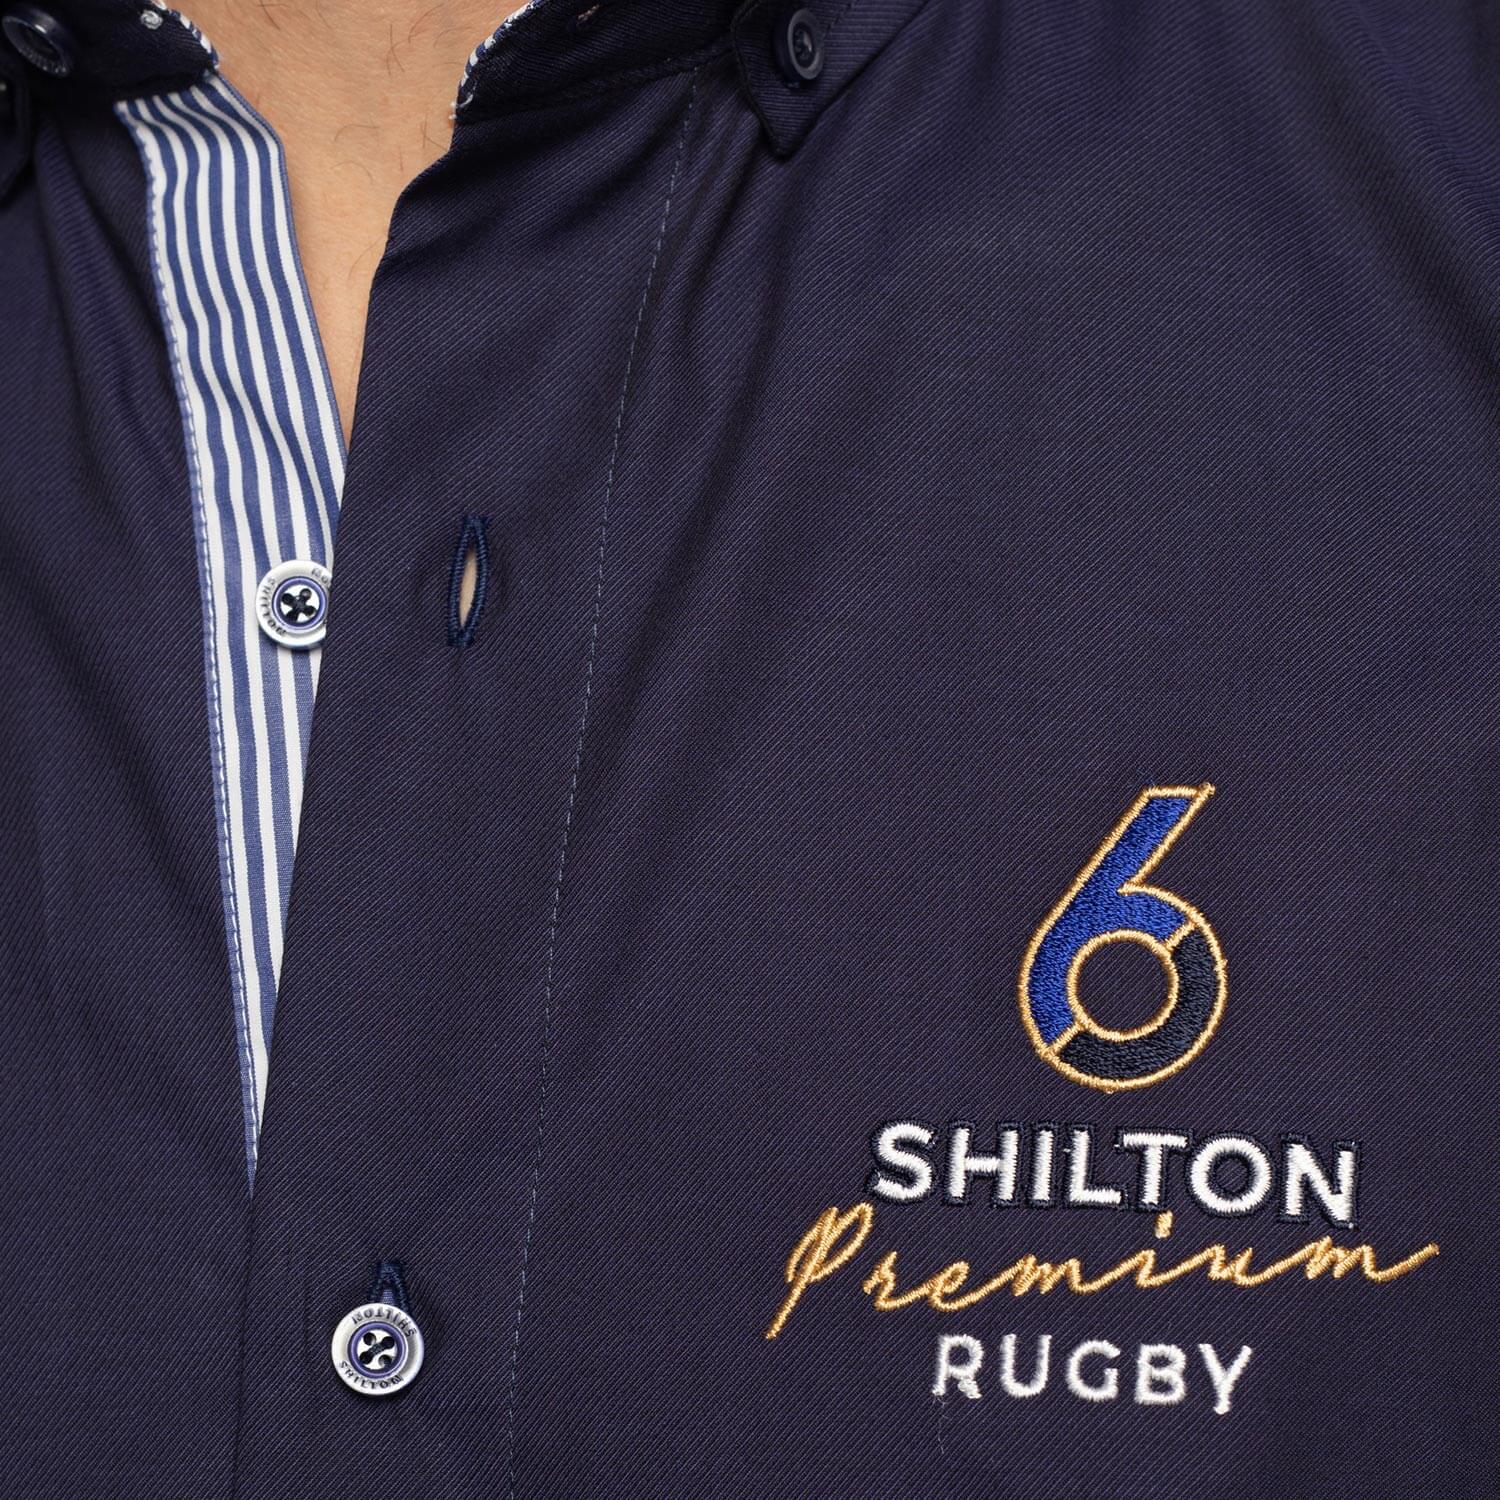 Chemise rugby 6 nations